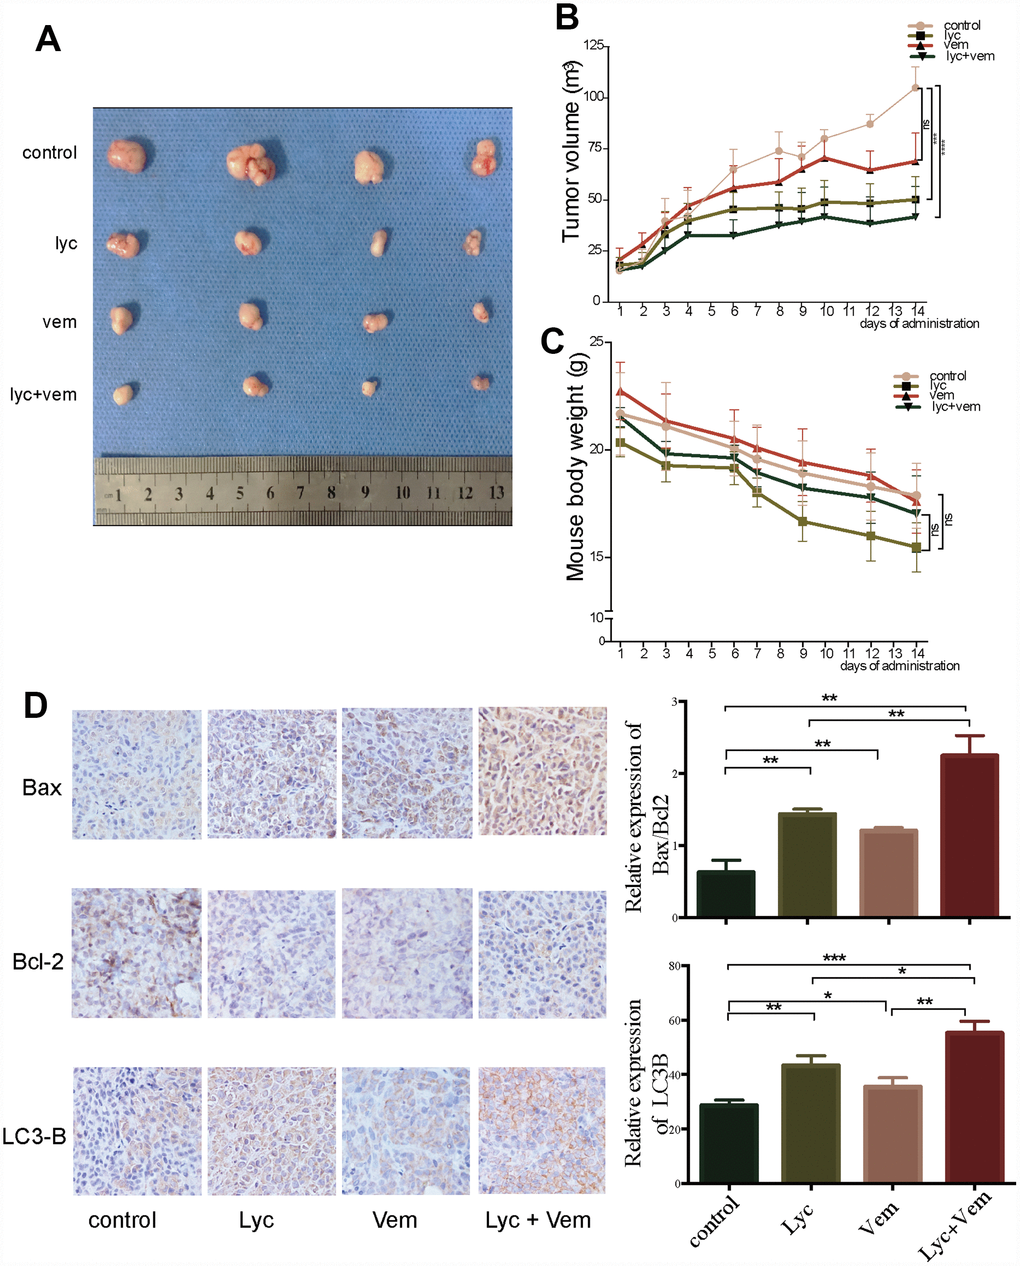 Anti-colorectal cancer activity of lycorine in xenograft mouse models. (A) Volume of the tumors after dissection. (B) Changes in tumor volume after treatment. (C) Changes in mouse weight after treatment. (D) Immunohistochemistry of the indicated proteins in vivo. (*p 